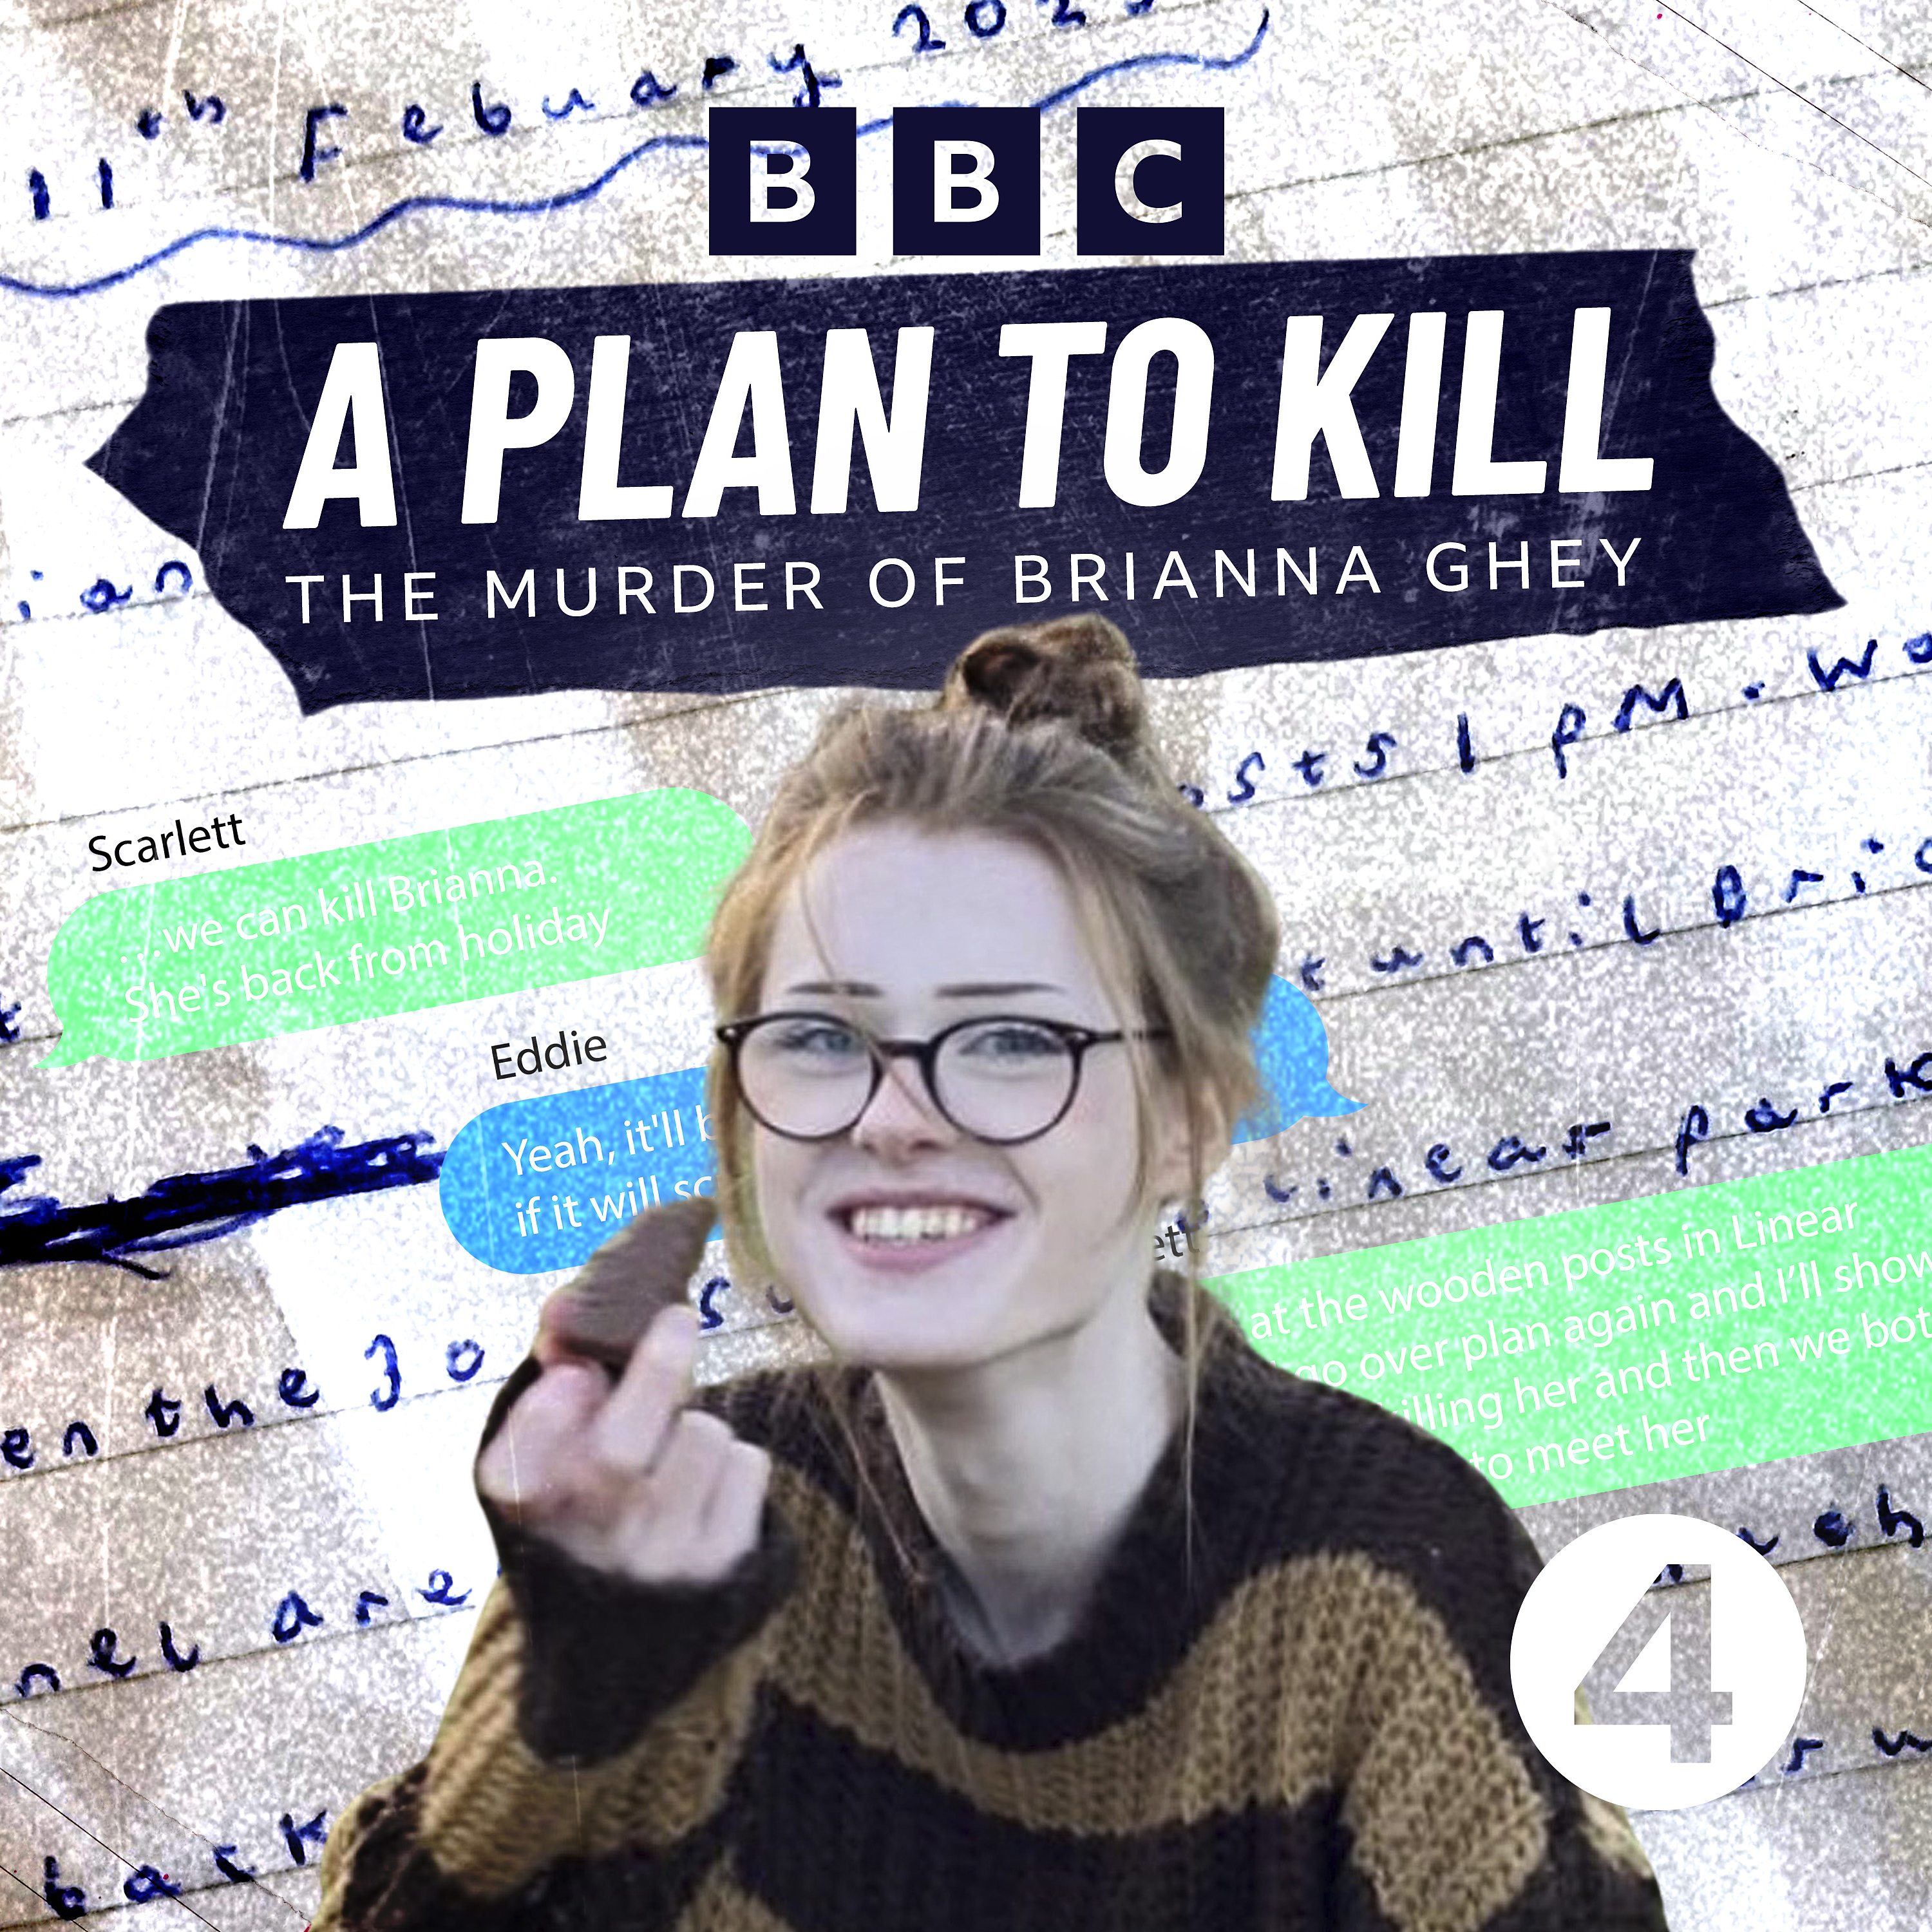 A Plan to Kill - The Murder of Brianna Ghey